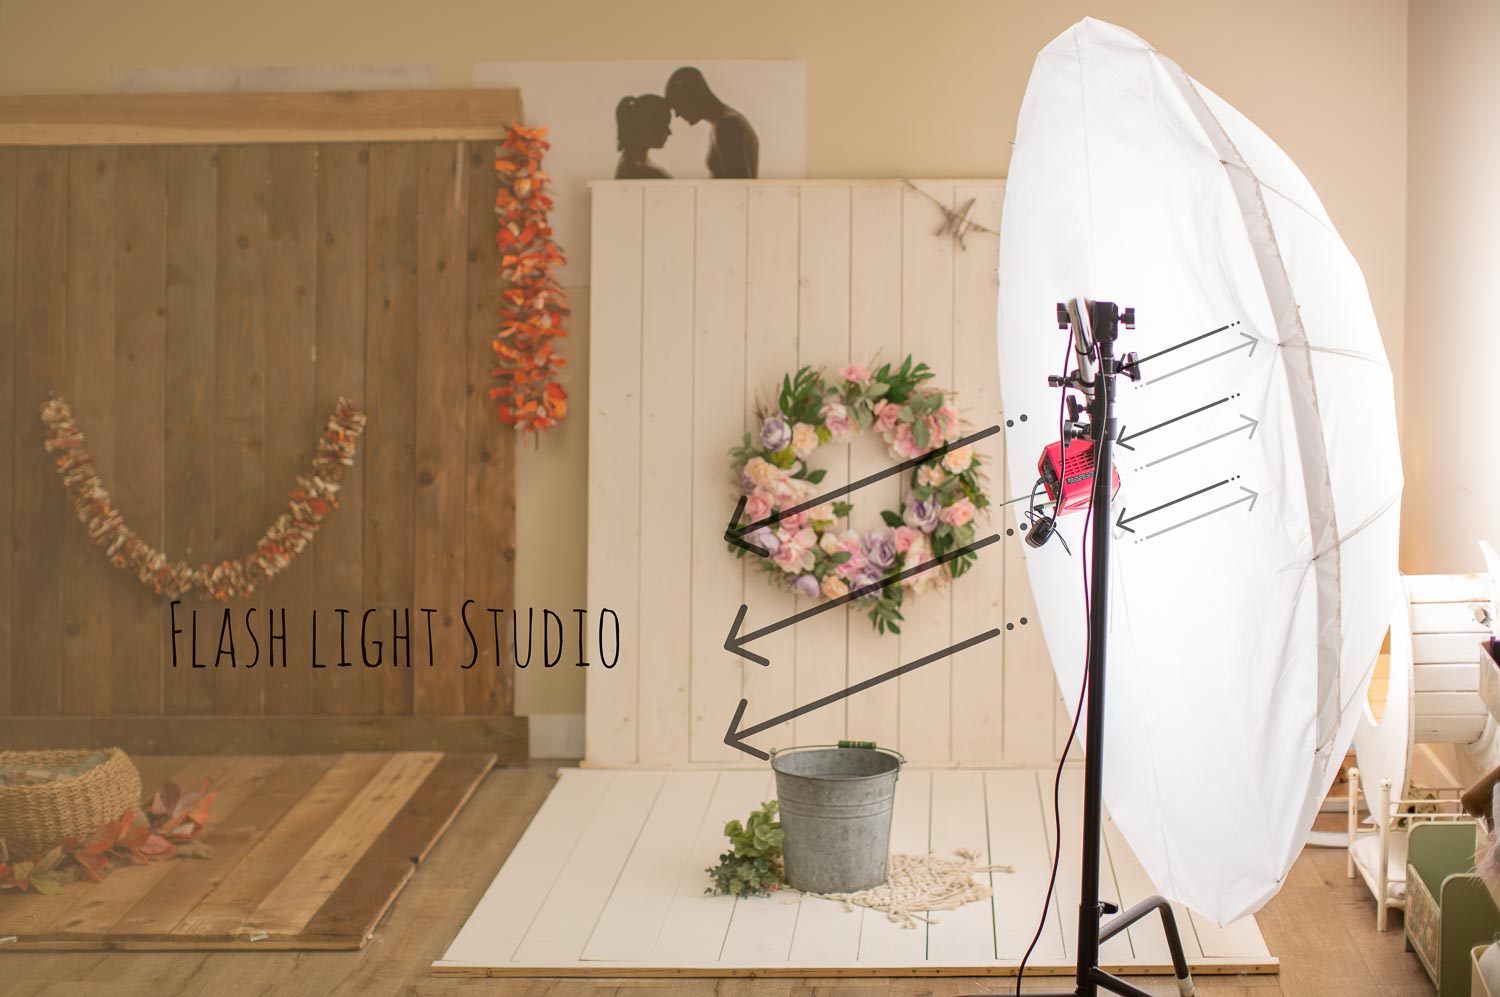 Is studio flashlight photography safe for babies and newborns